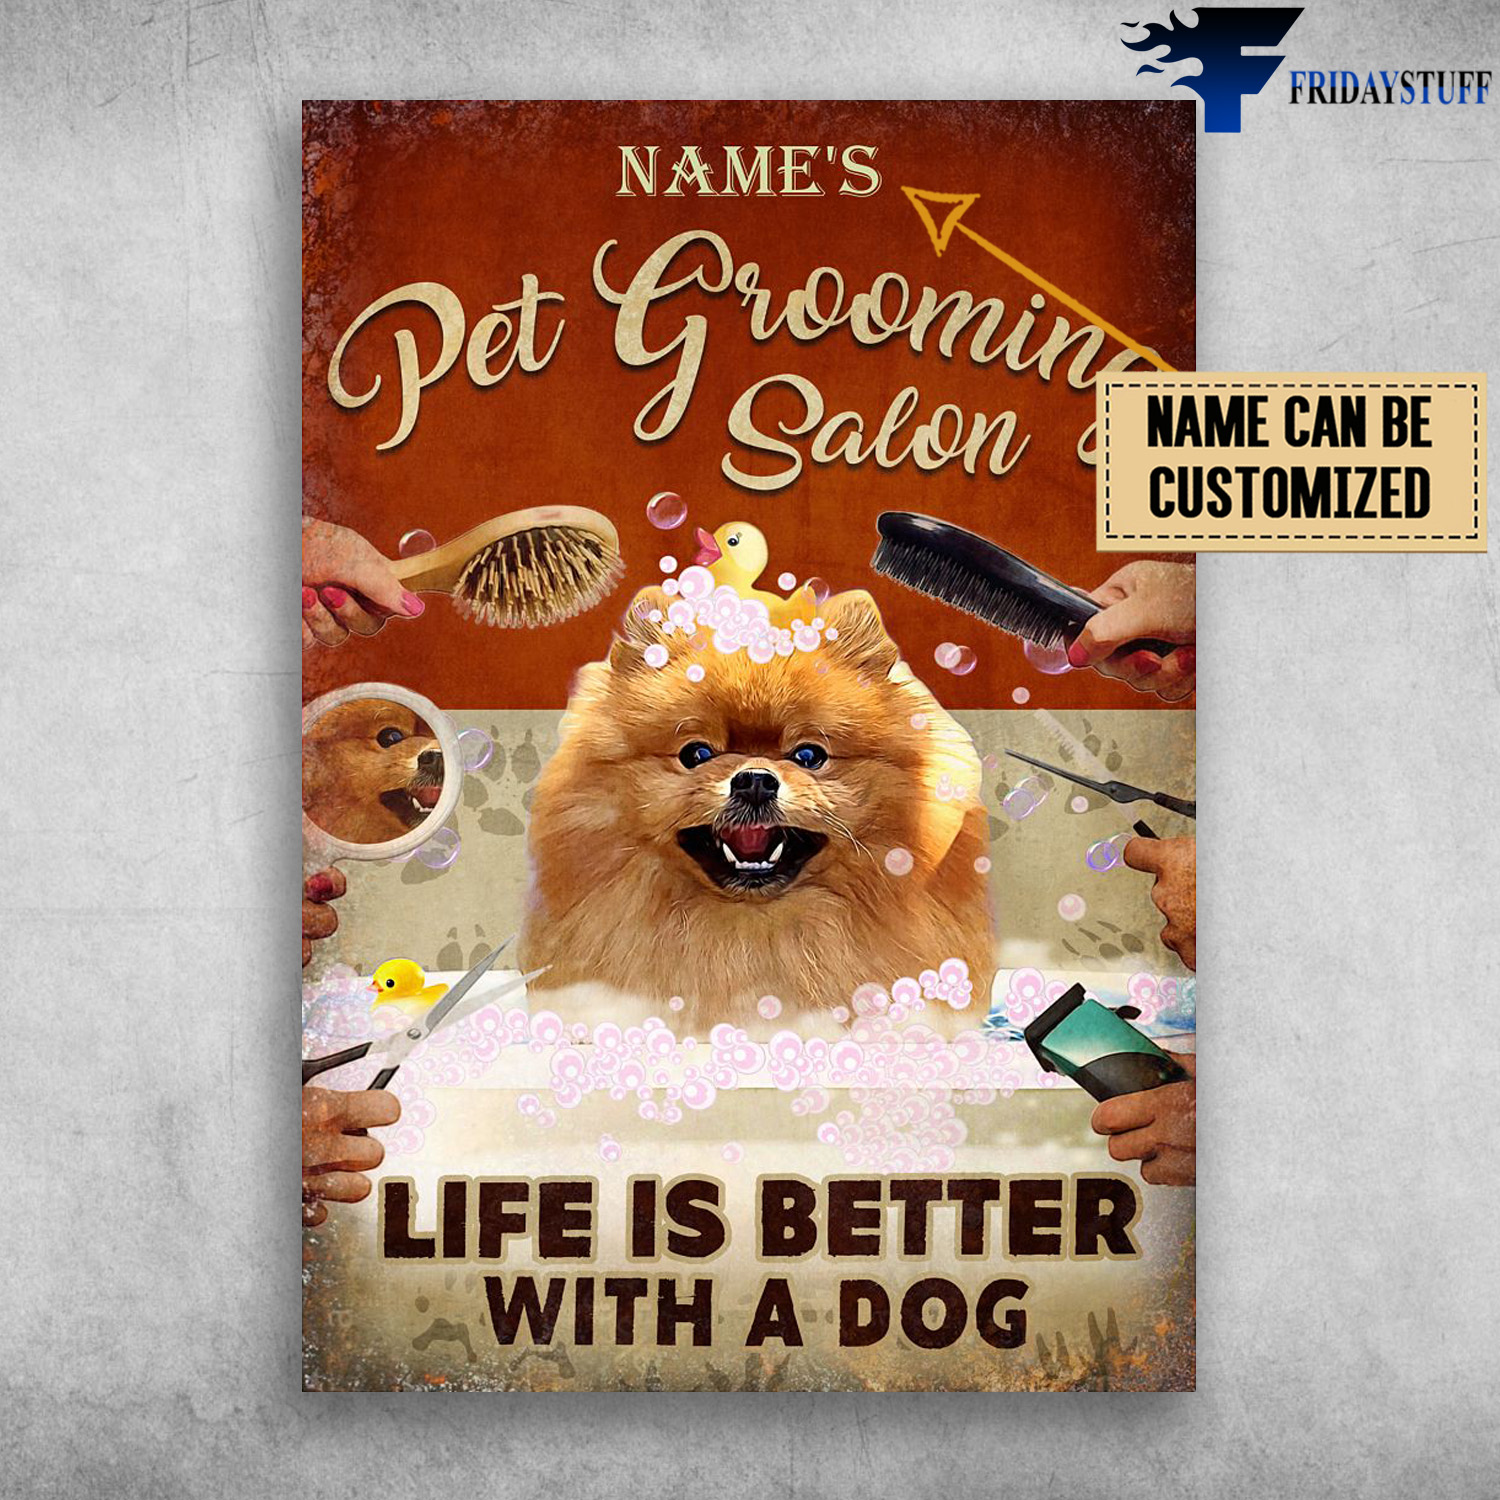 Pomeranian Dog, Pet Grooming Salon, Life Is Better With A Dog